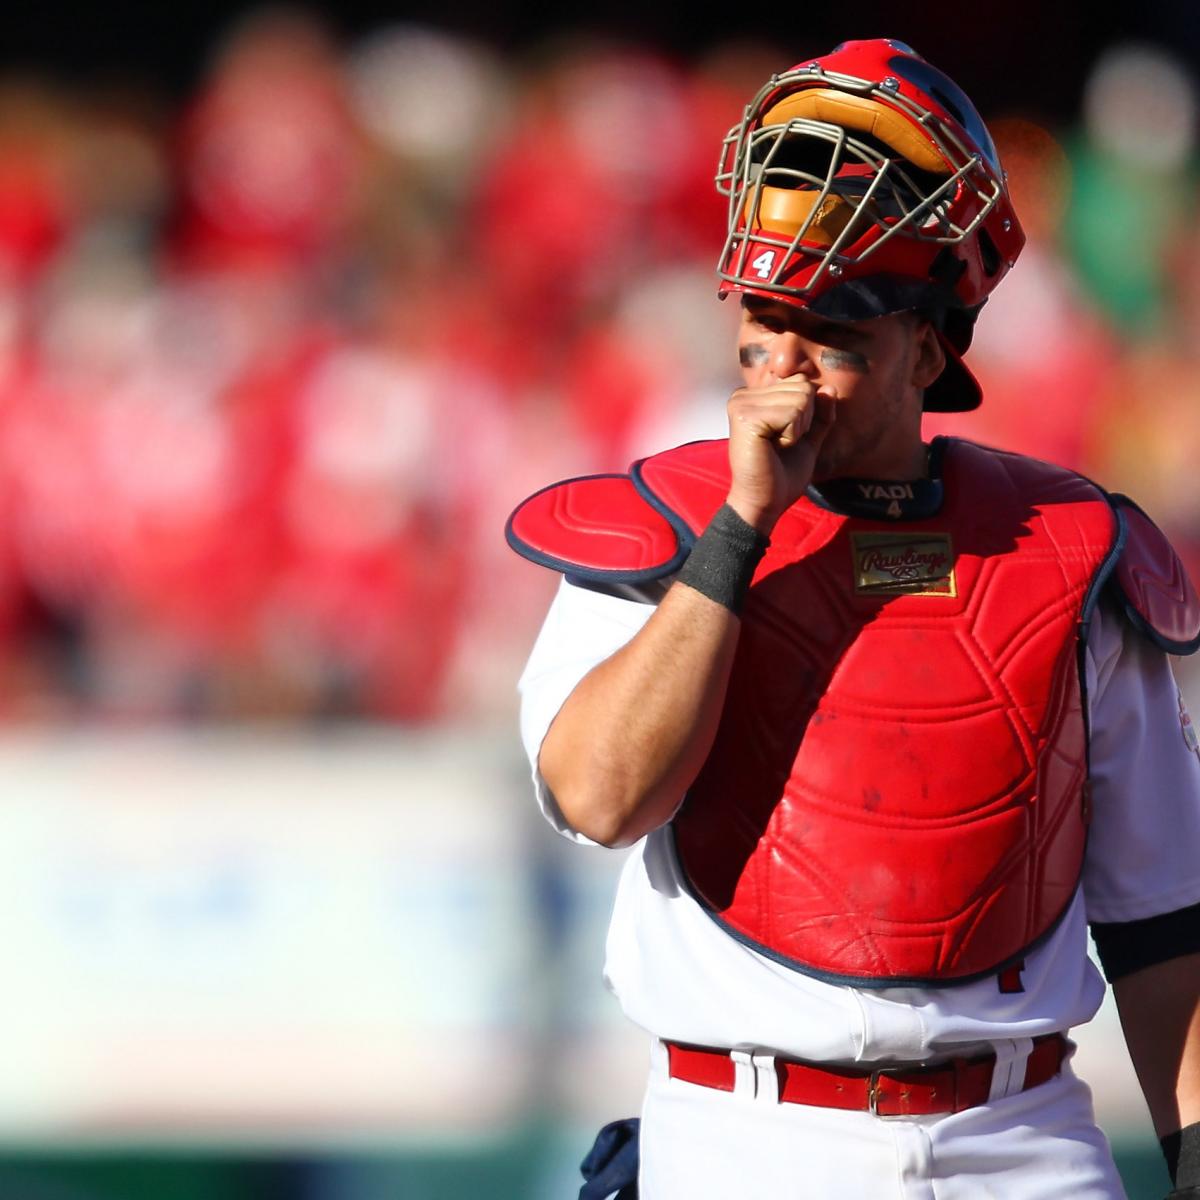 Is Yadier Molina the Best Defensive Catcher in St. Louis Cardinals